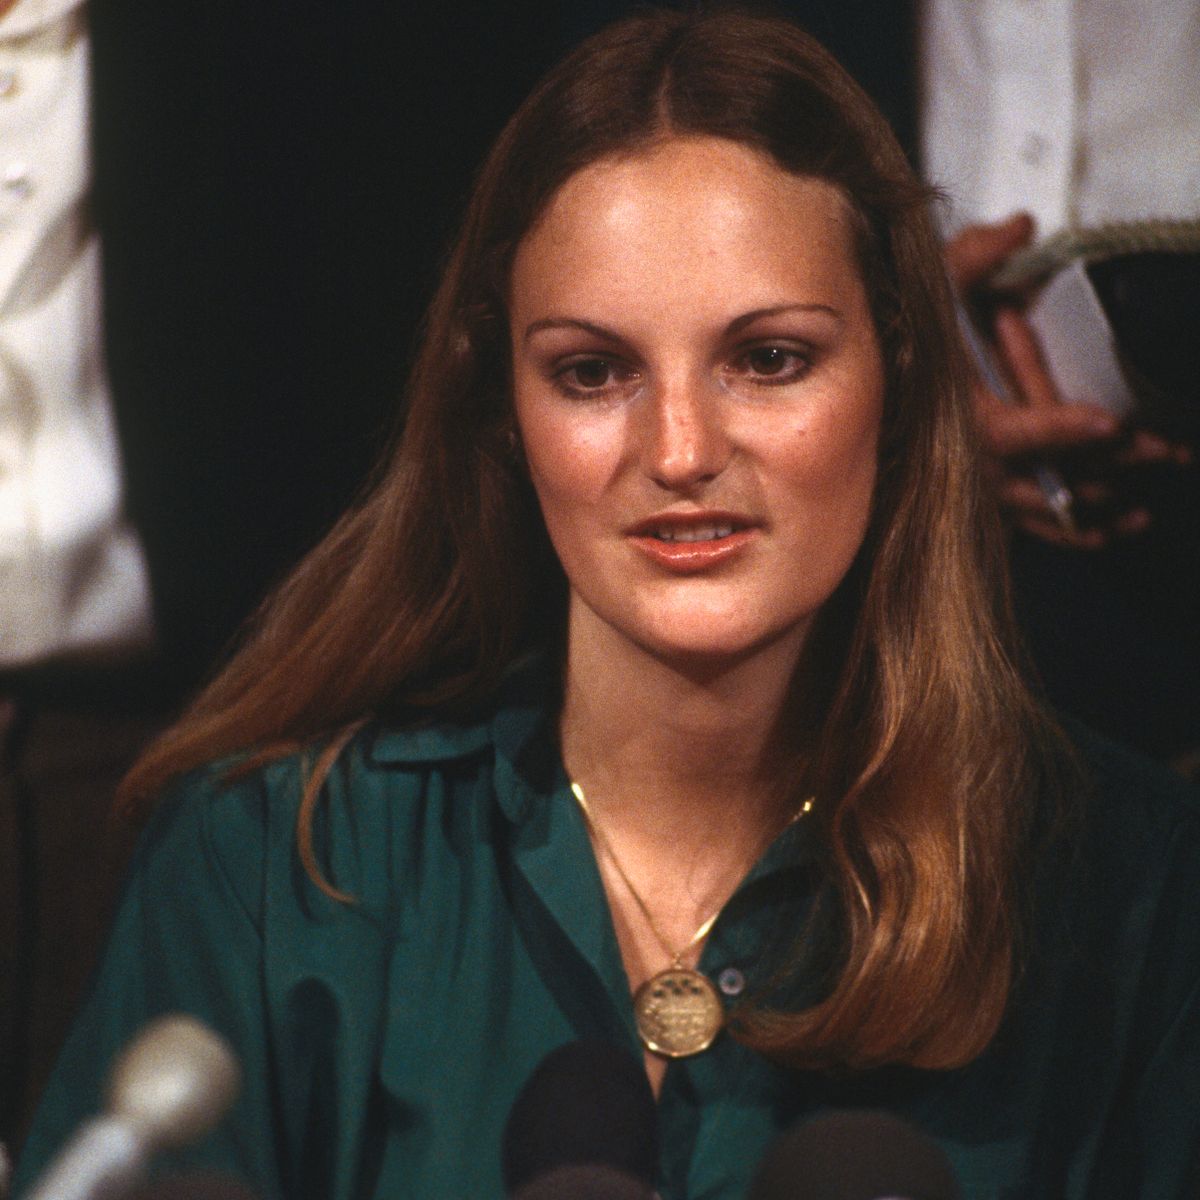 Patty Hearst wearing a green polo